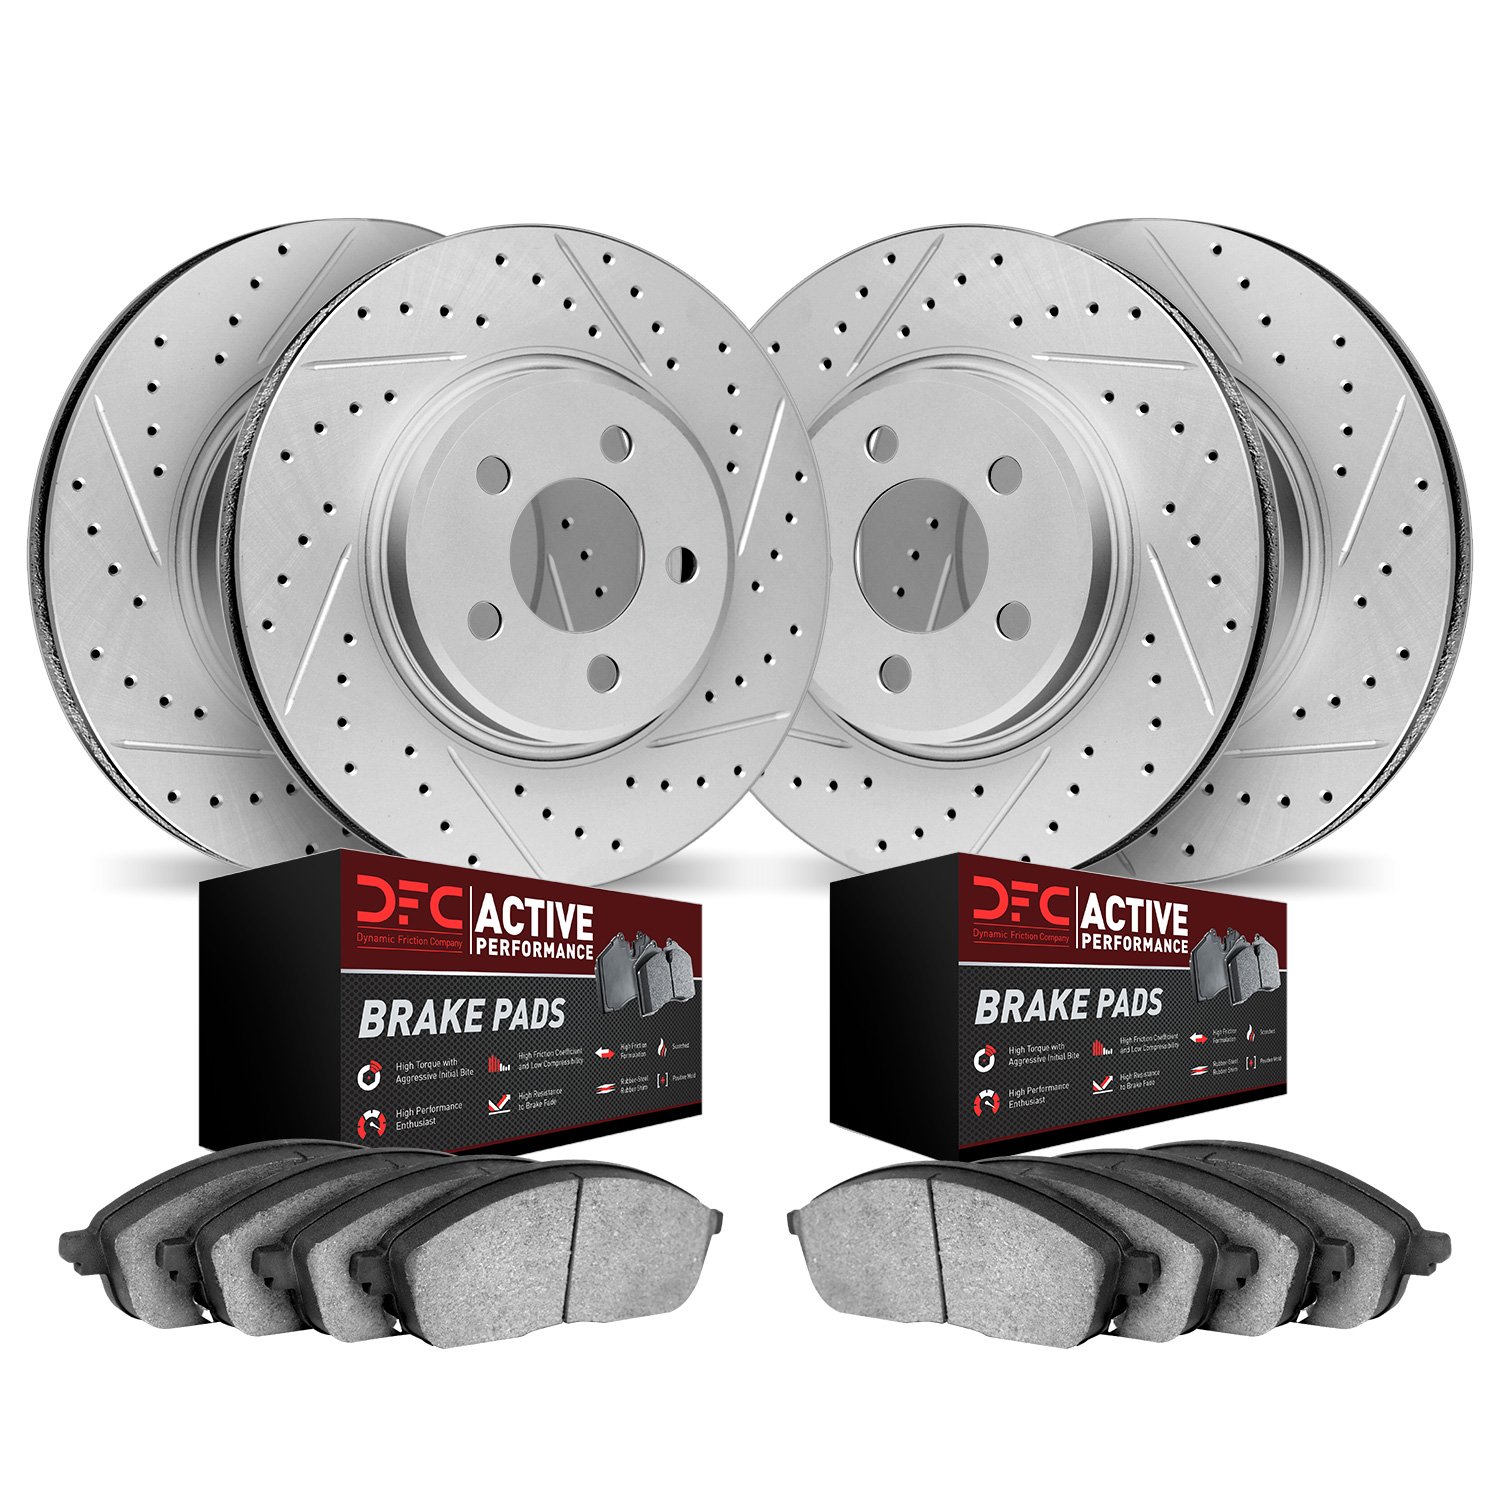 2704-31089 Geoperformance Drilled/Slotted Brake Rotors with Active Performance Pads Kit, 2013-2013 BMW, Position: Front and Rear